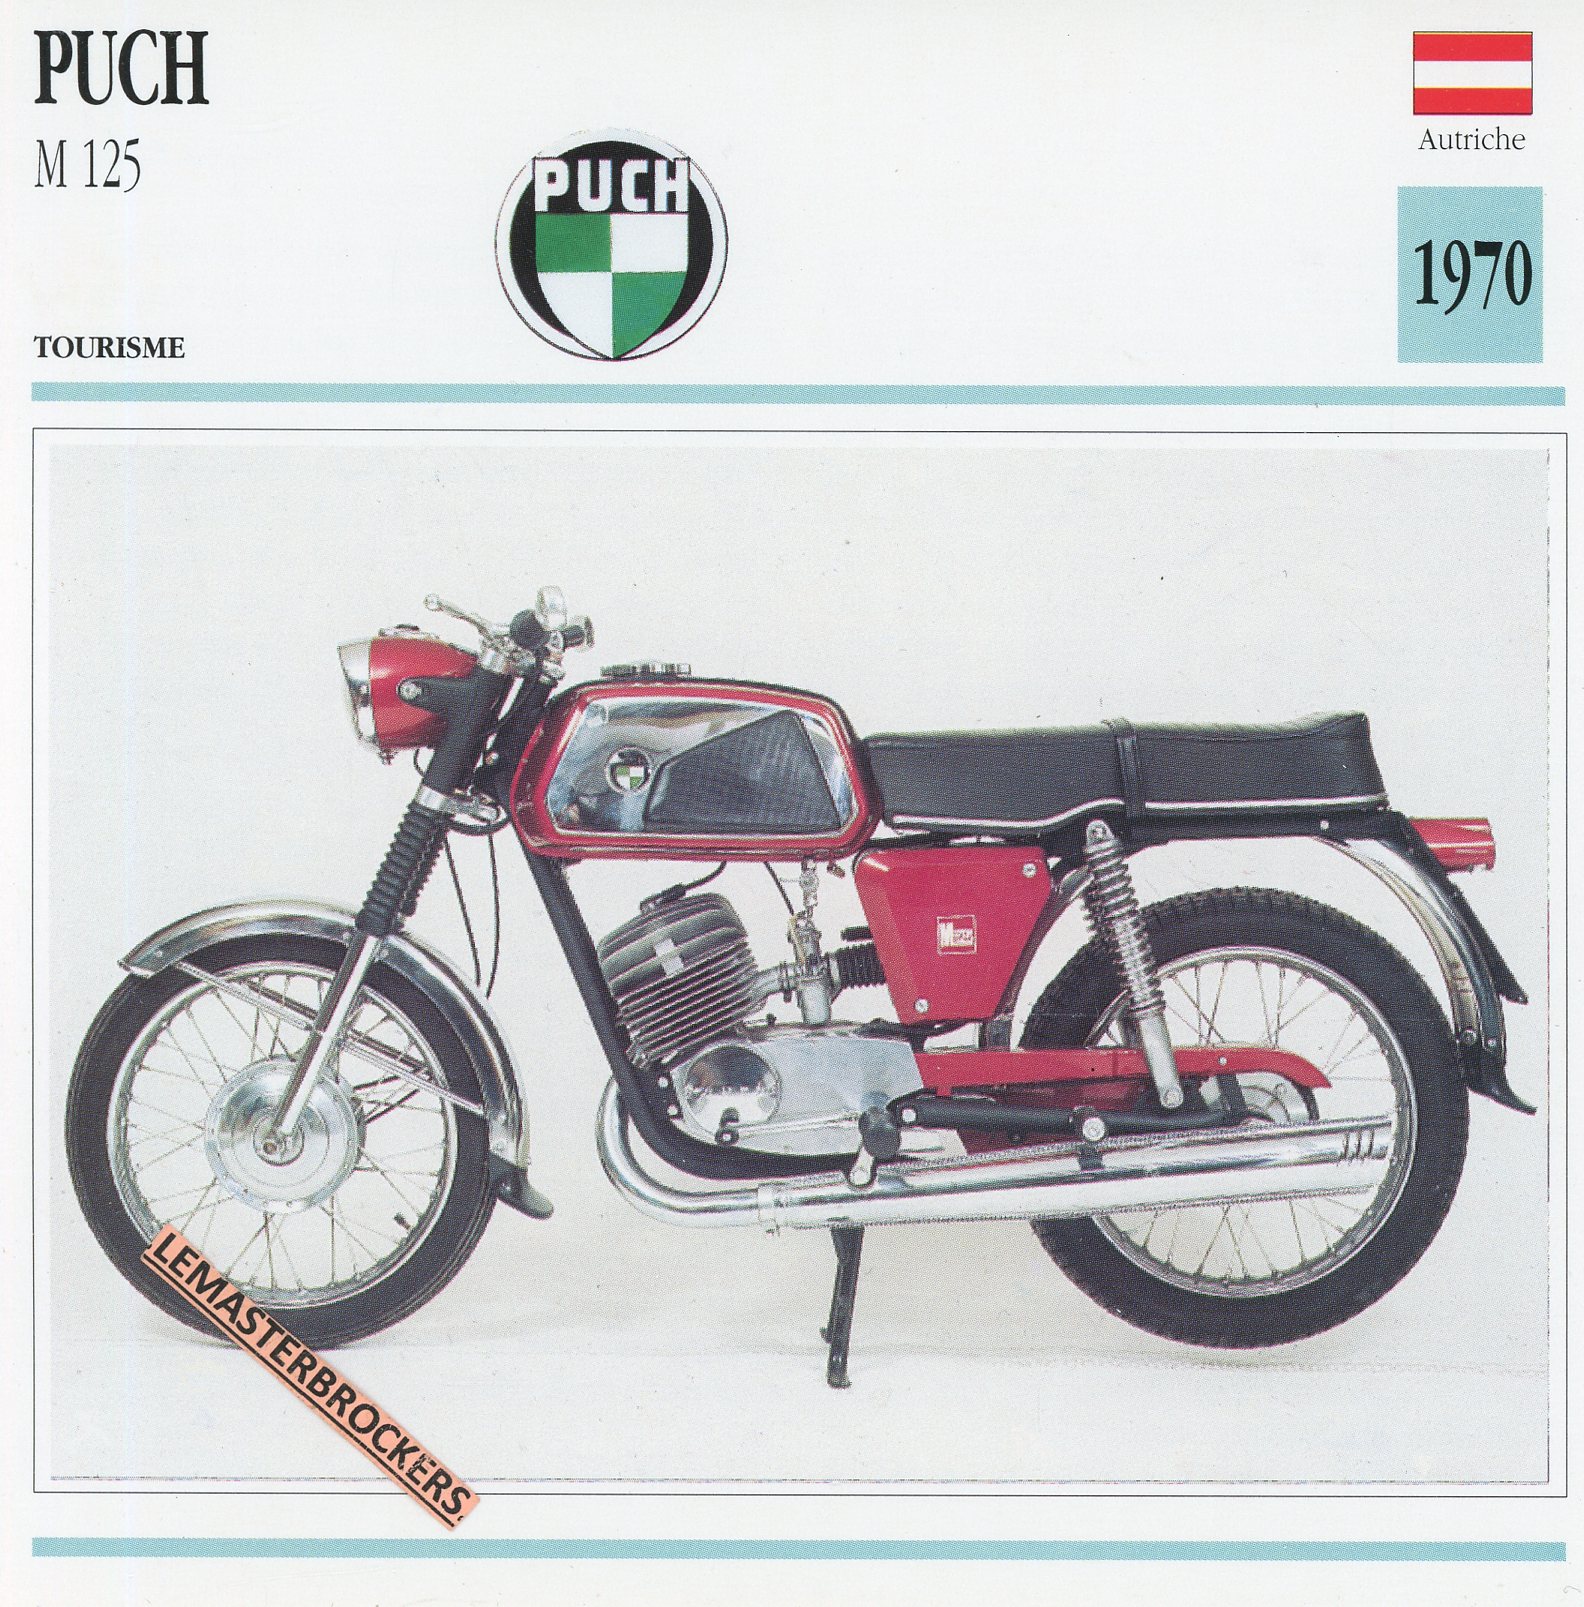 PUCH-M125-1970-FICHE-MOTO-MOTORCYCLE-CARDS-ATLAS-LEMASTERBROCKERS